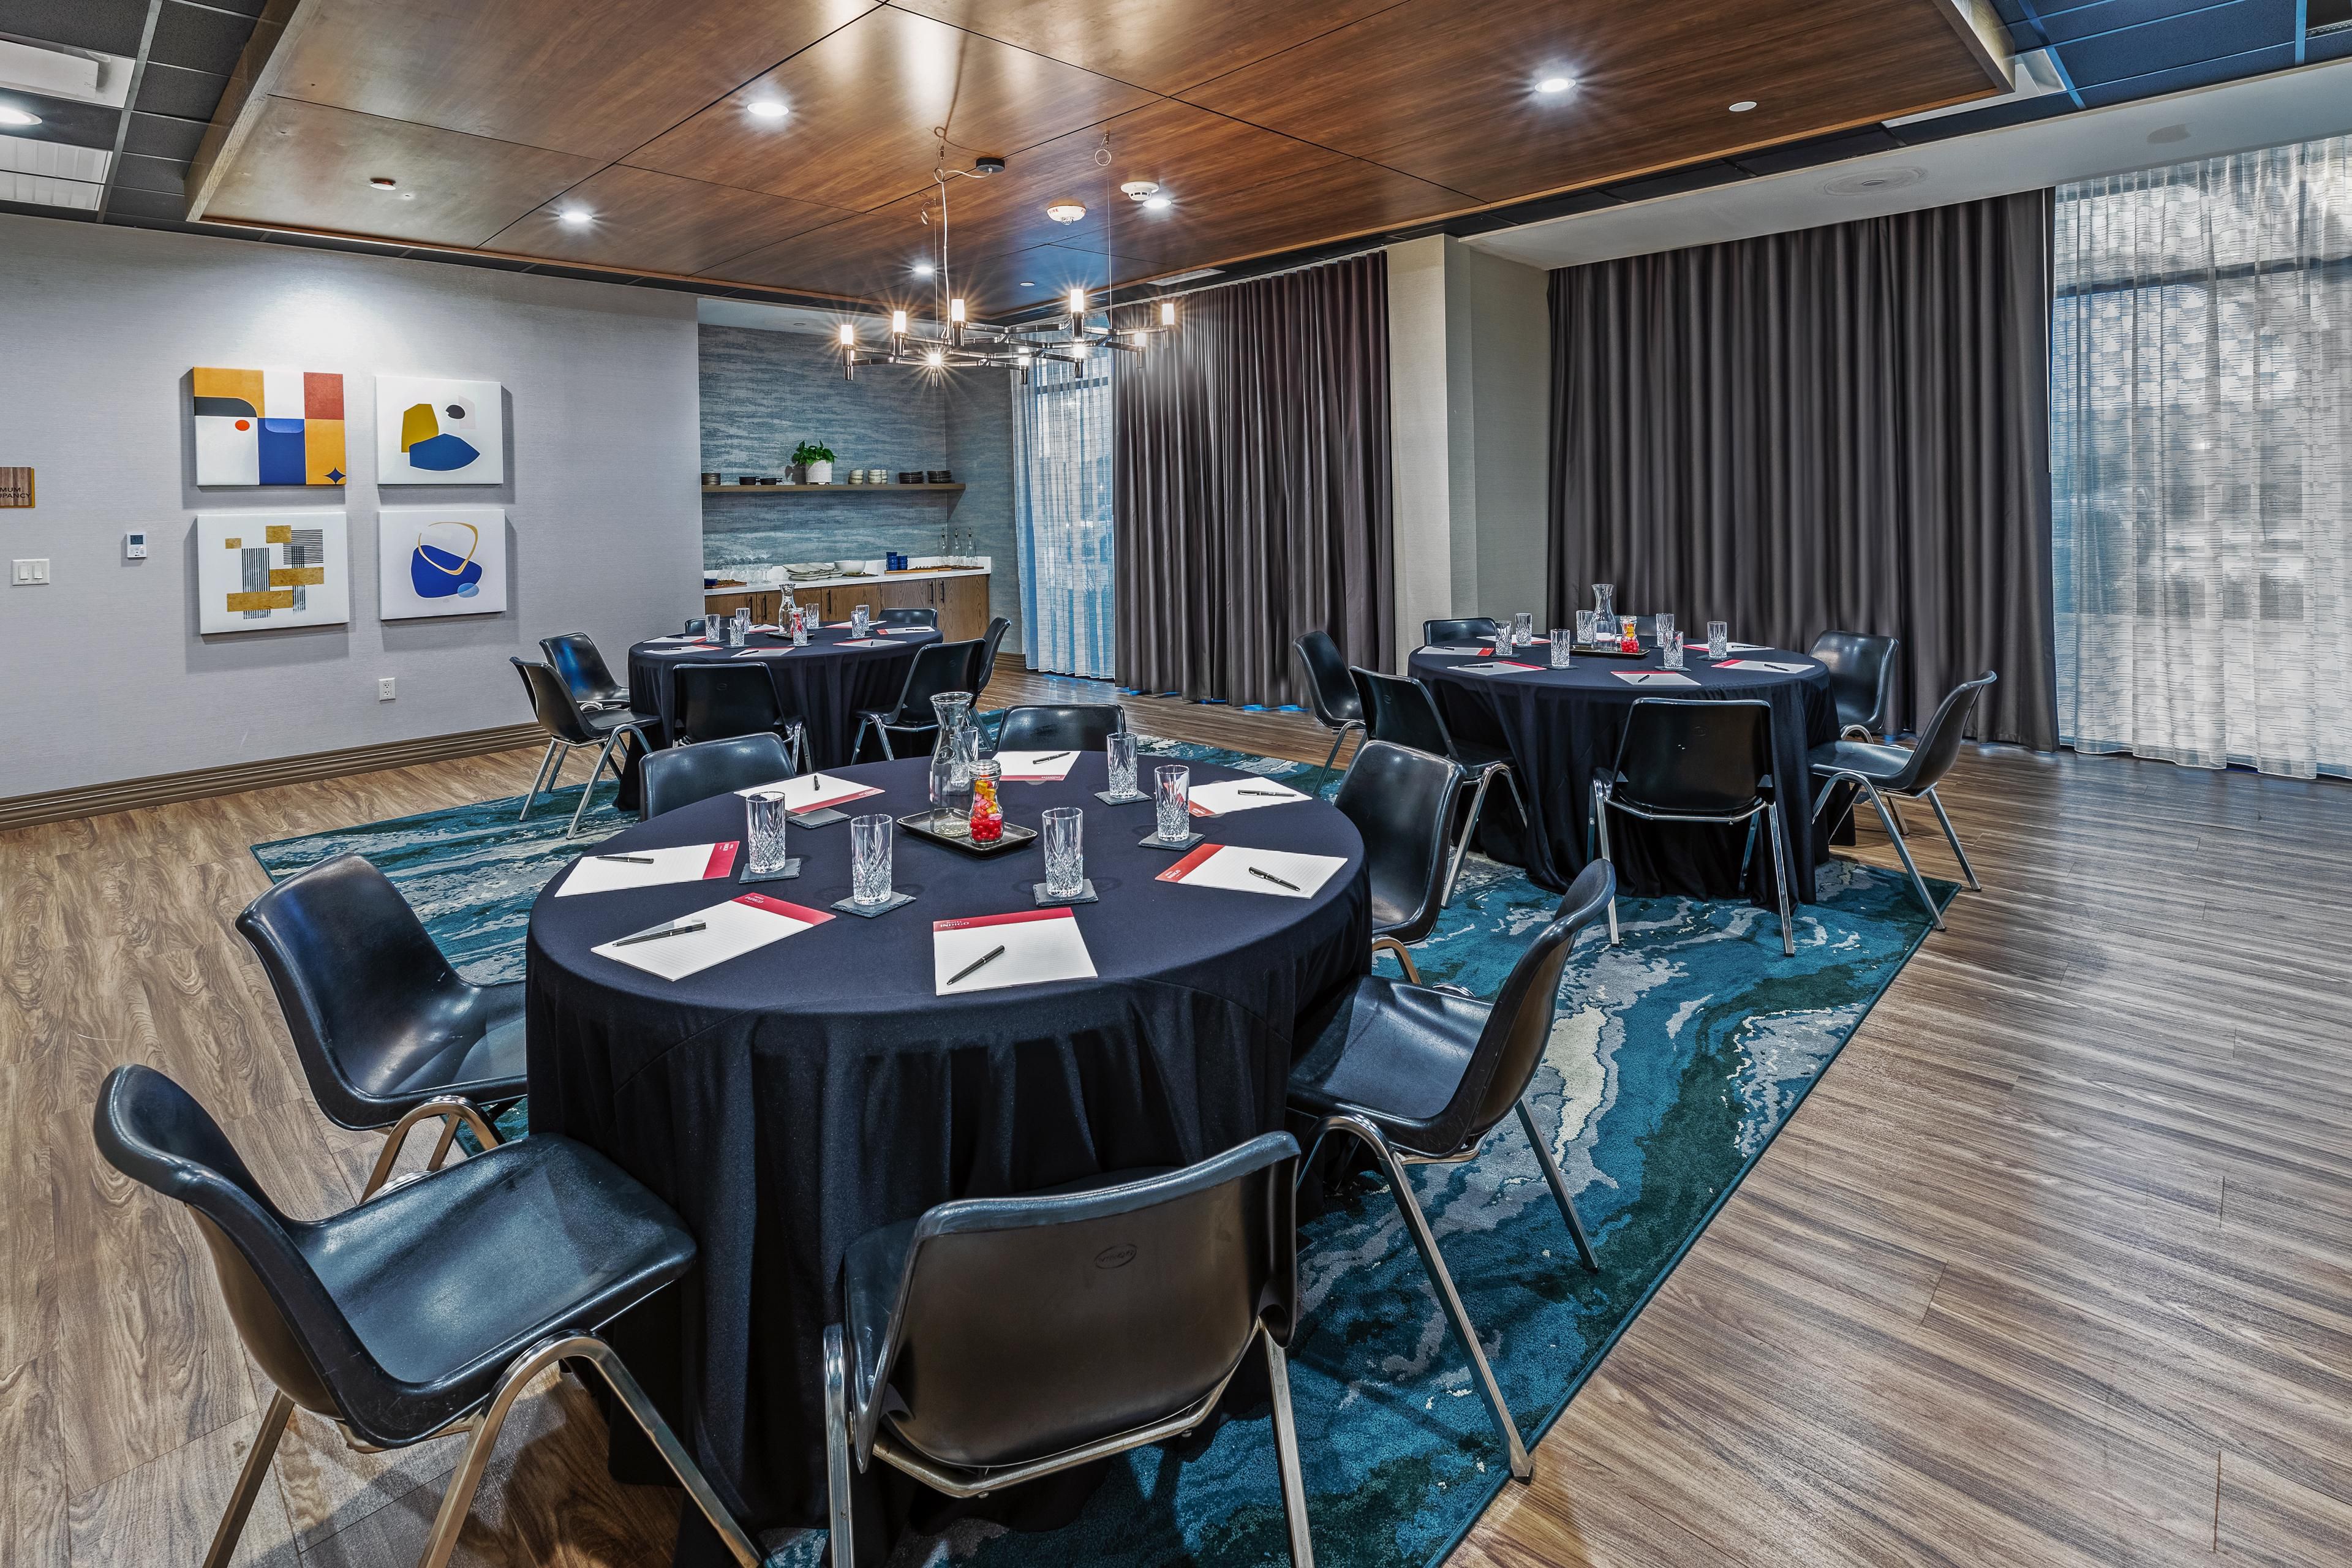 Host a business meeting, networking event, birthday cocktail party, or retreat in our intimate event space adjacent to our reception area. Our adaptive venues can be transformed into the perfect atmosphere, from high-tech to high style, for up to 60 guests. Our team will coordinate every detail, from audiovisual to catering.